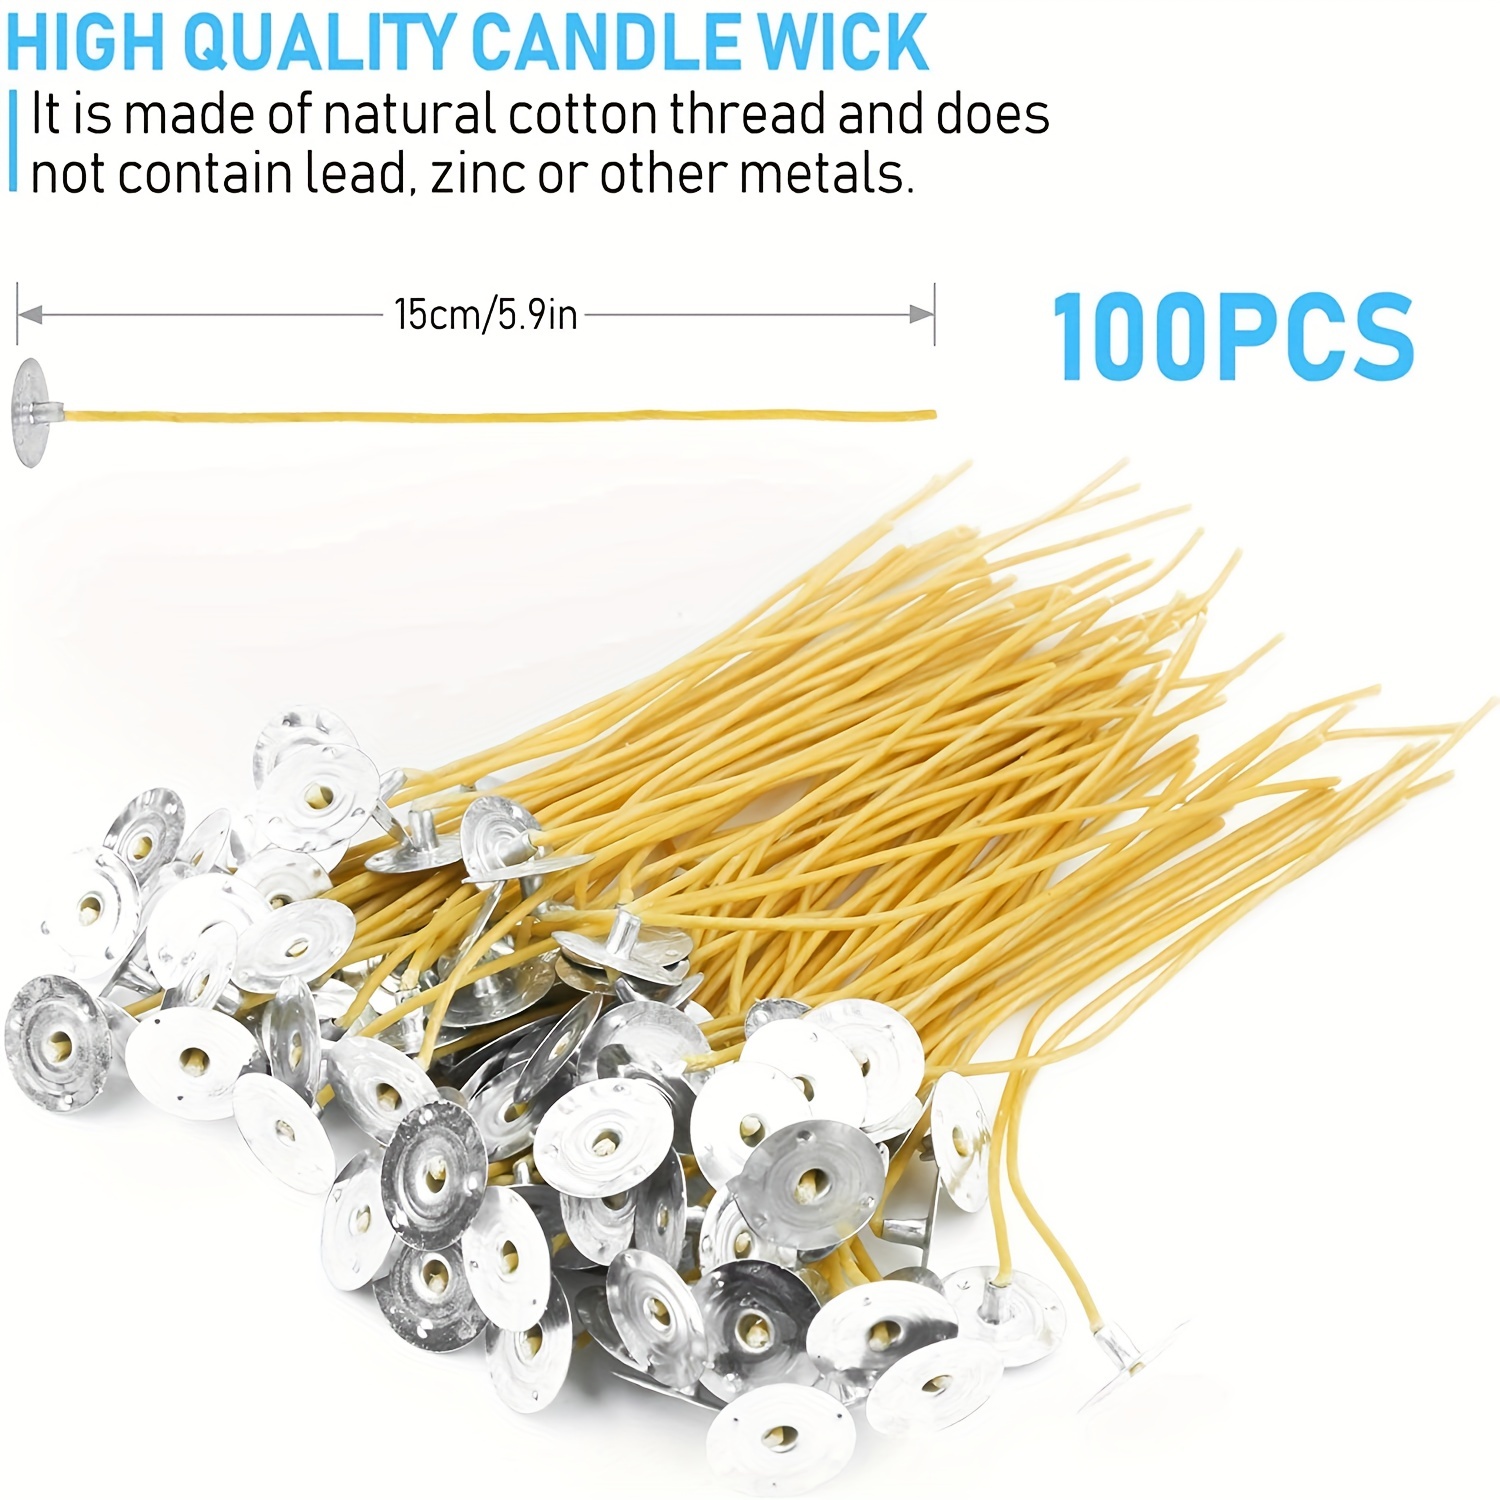 100pcs 6 Inch Beeswax Candle Wicks,100pcs Hemp Candle Wick,Candle Wick Slow  Burning,Pre-Waxed Wick For Candle Making(2mm Diameter)